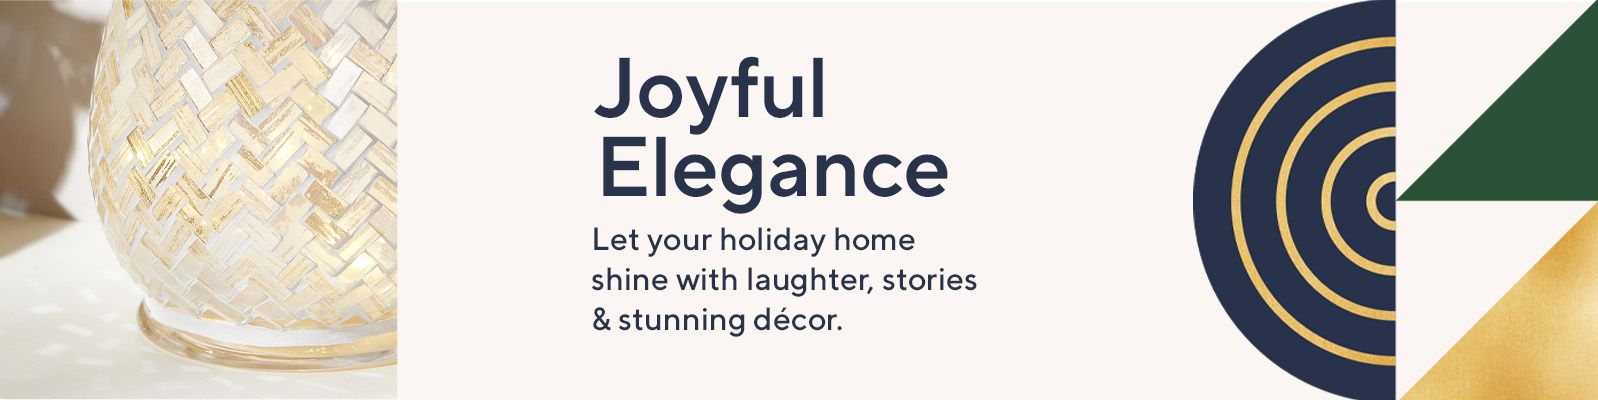 Joyful Elegance  Let your holiday home shine with laughter, stories & stunning décor